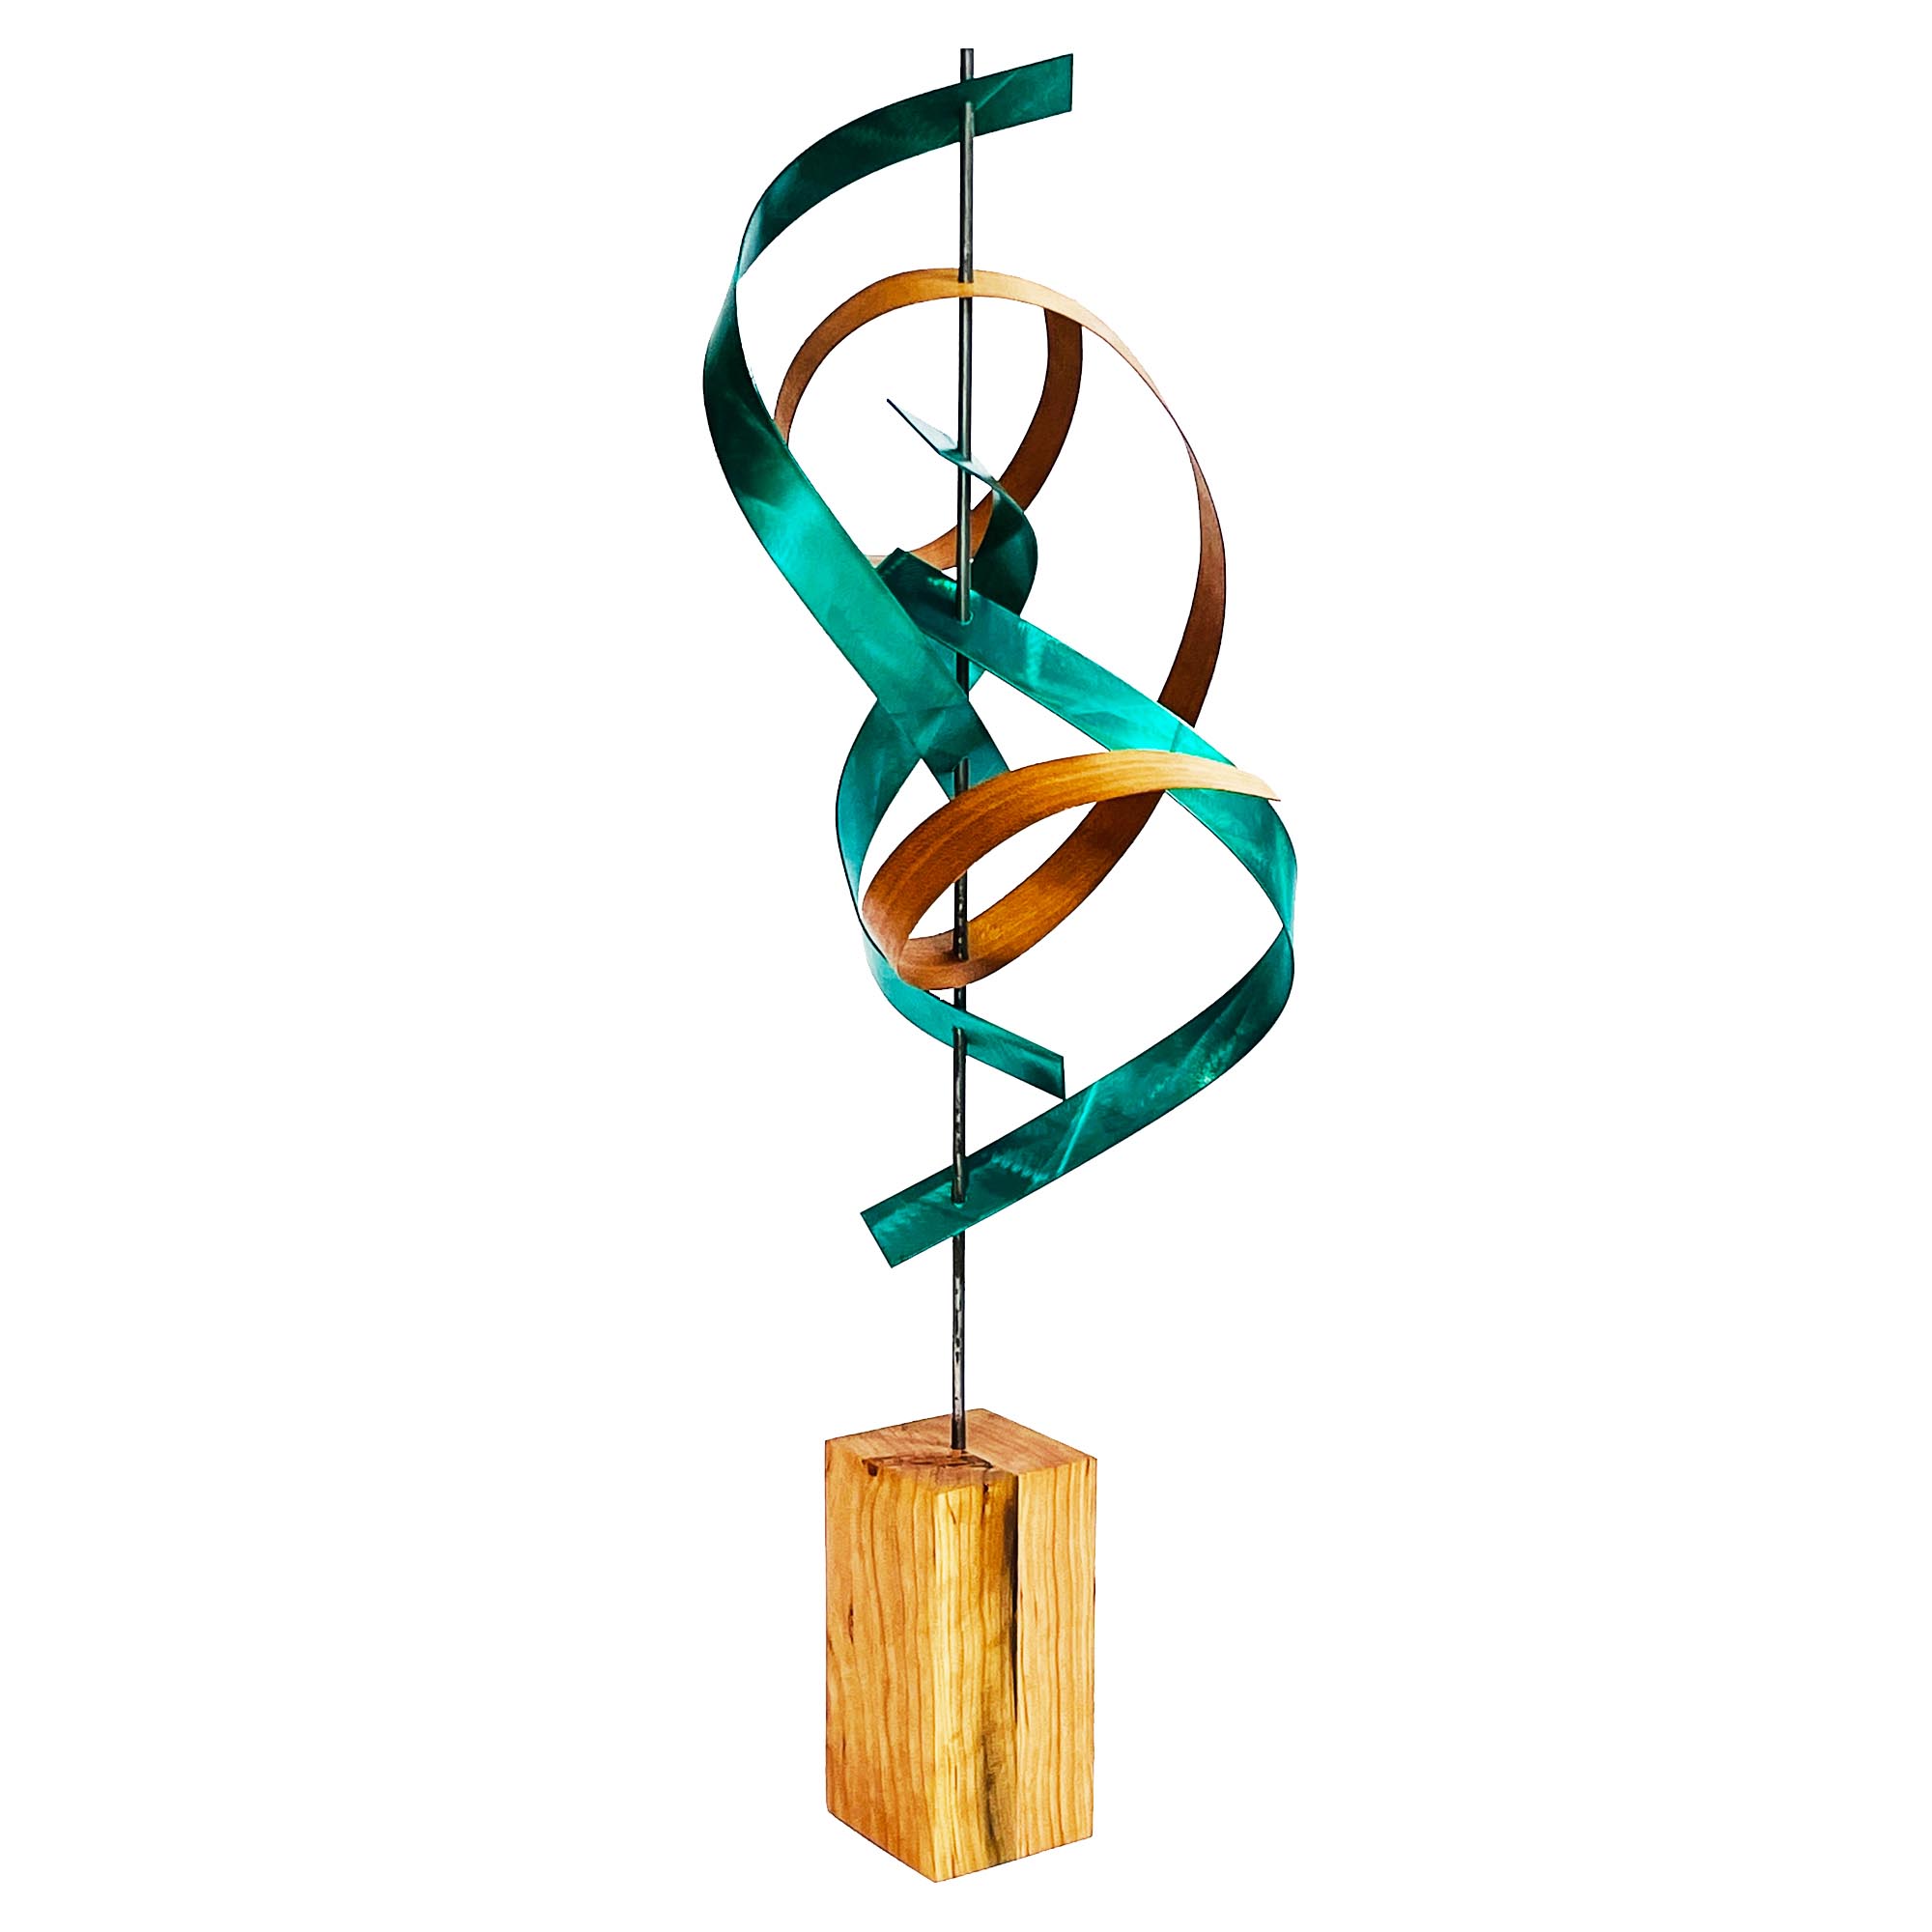 Hopper Cherry by Jackson Wright - Abstract Wood Sculpture, Kinetic Sculpture - Image 3